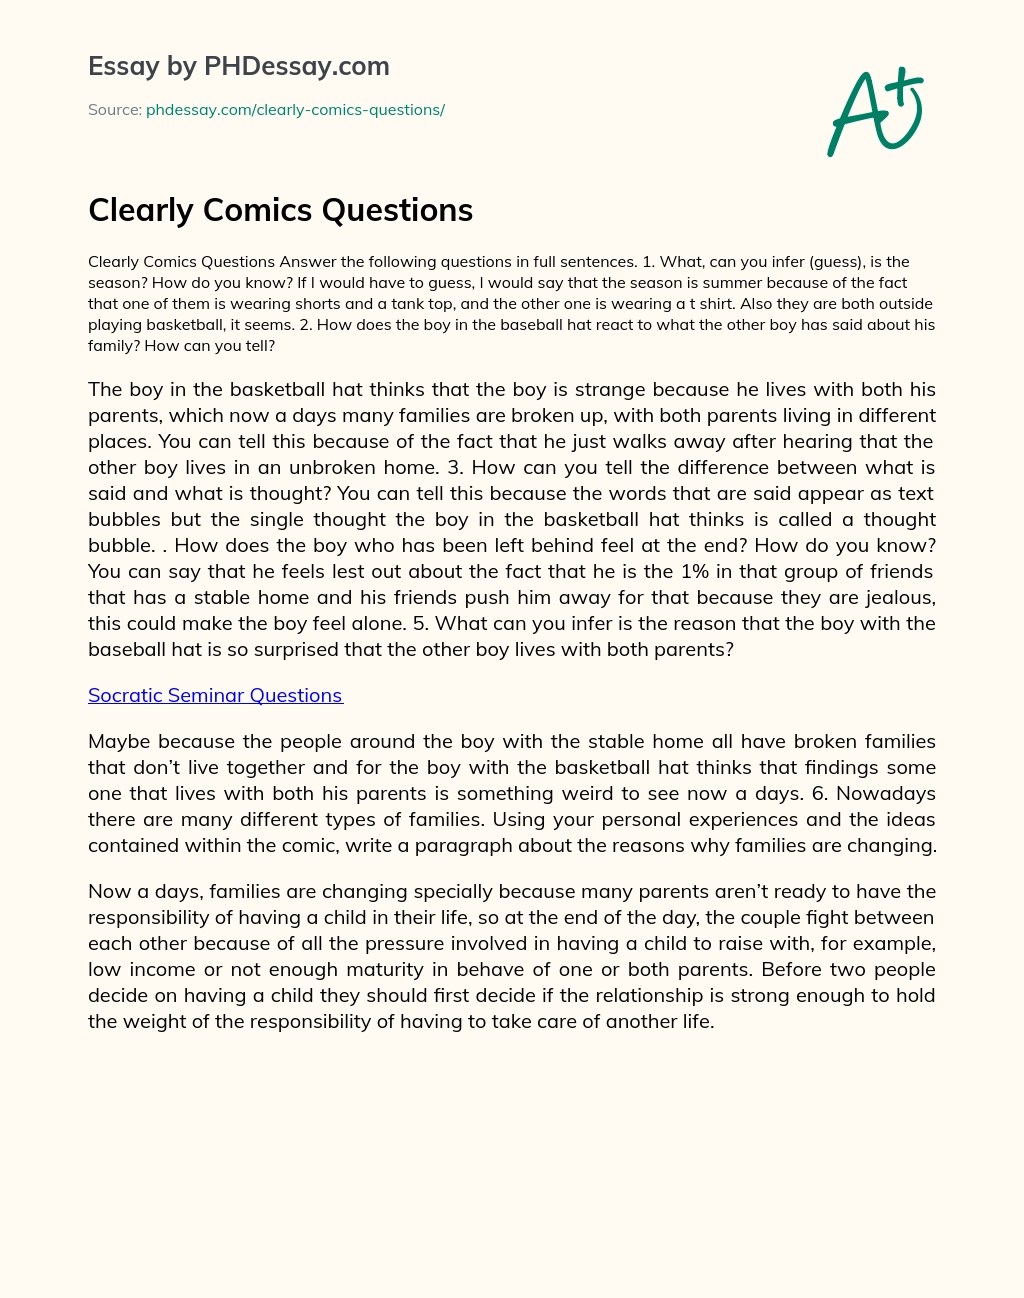 Clearly Comics Questions essay